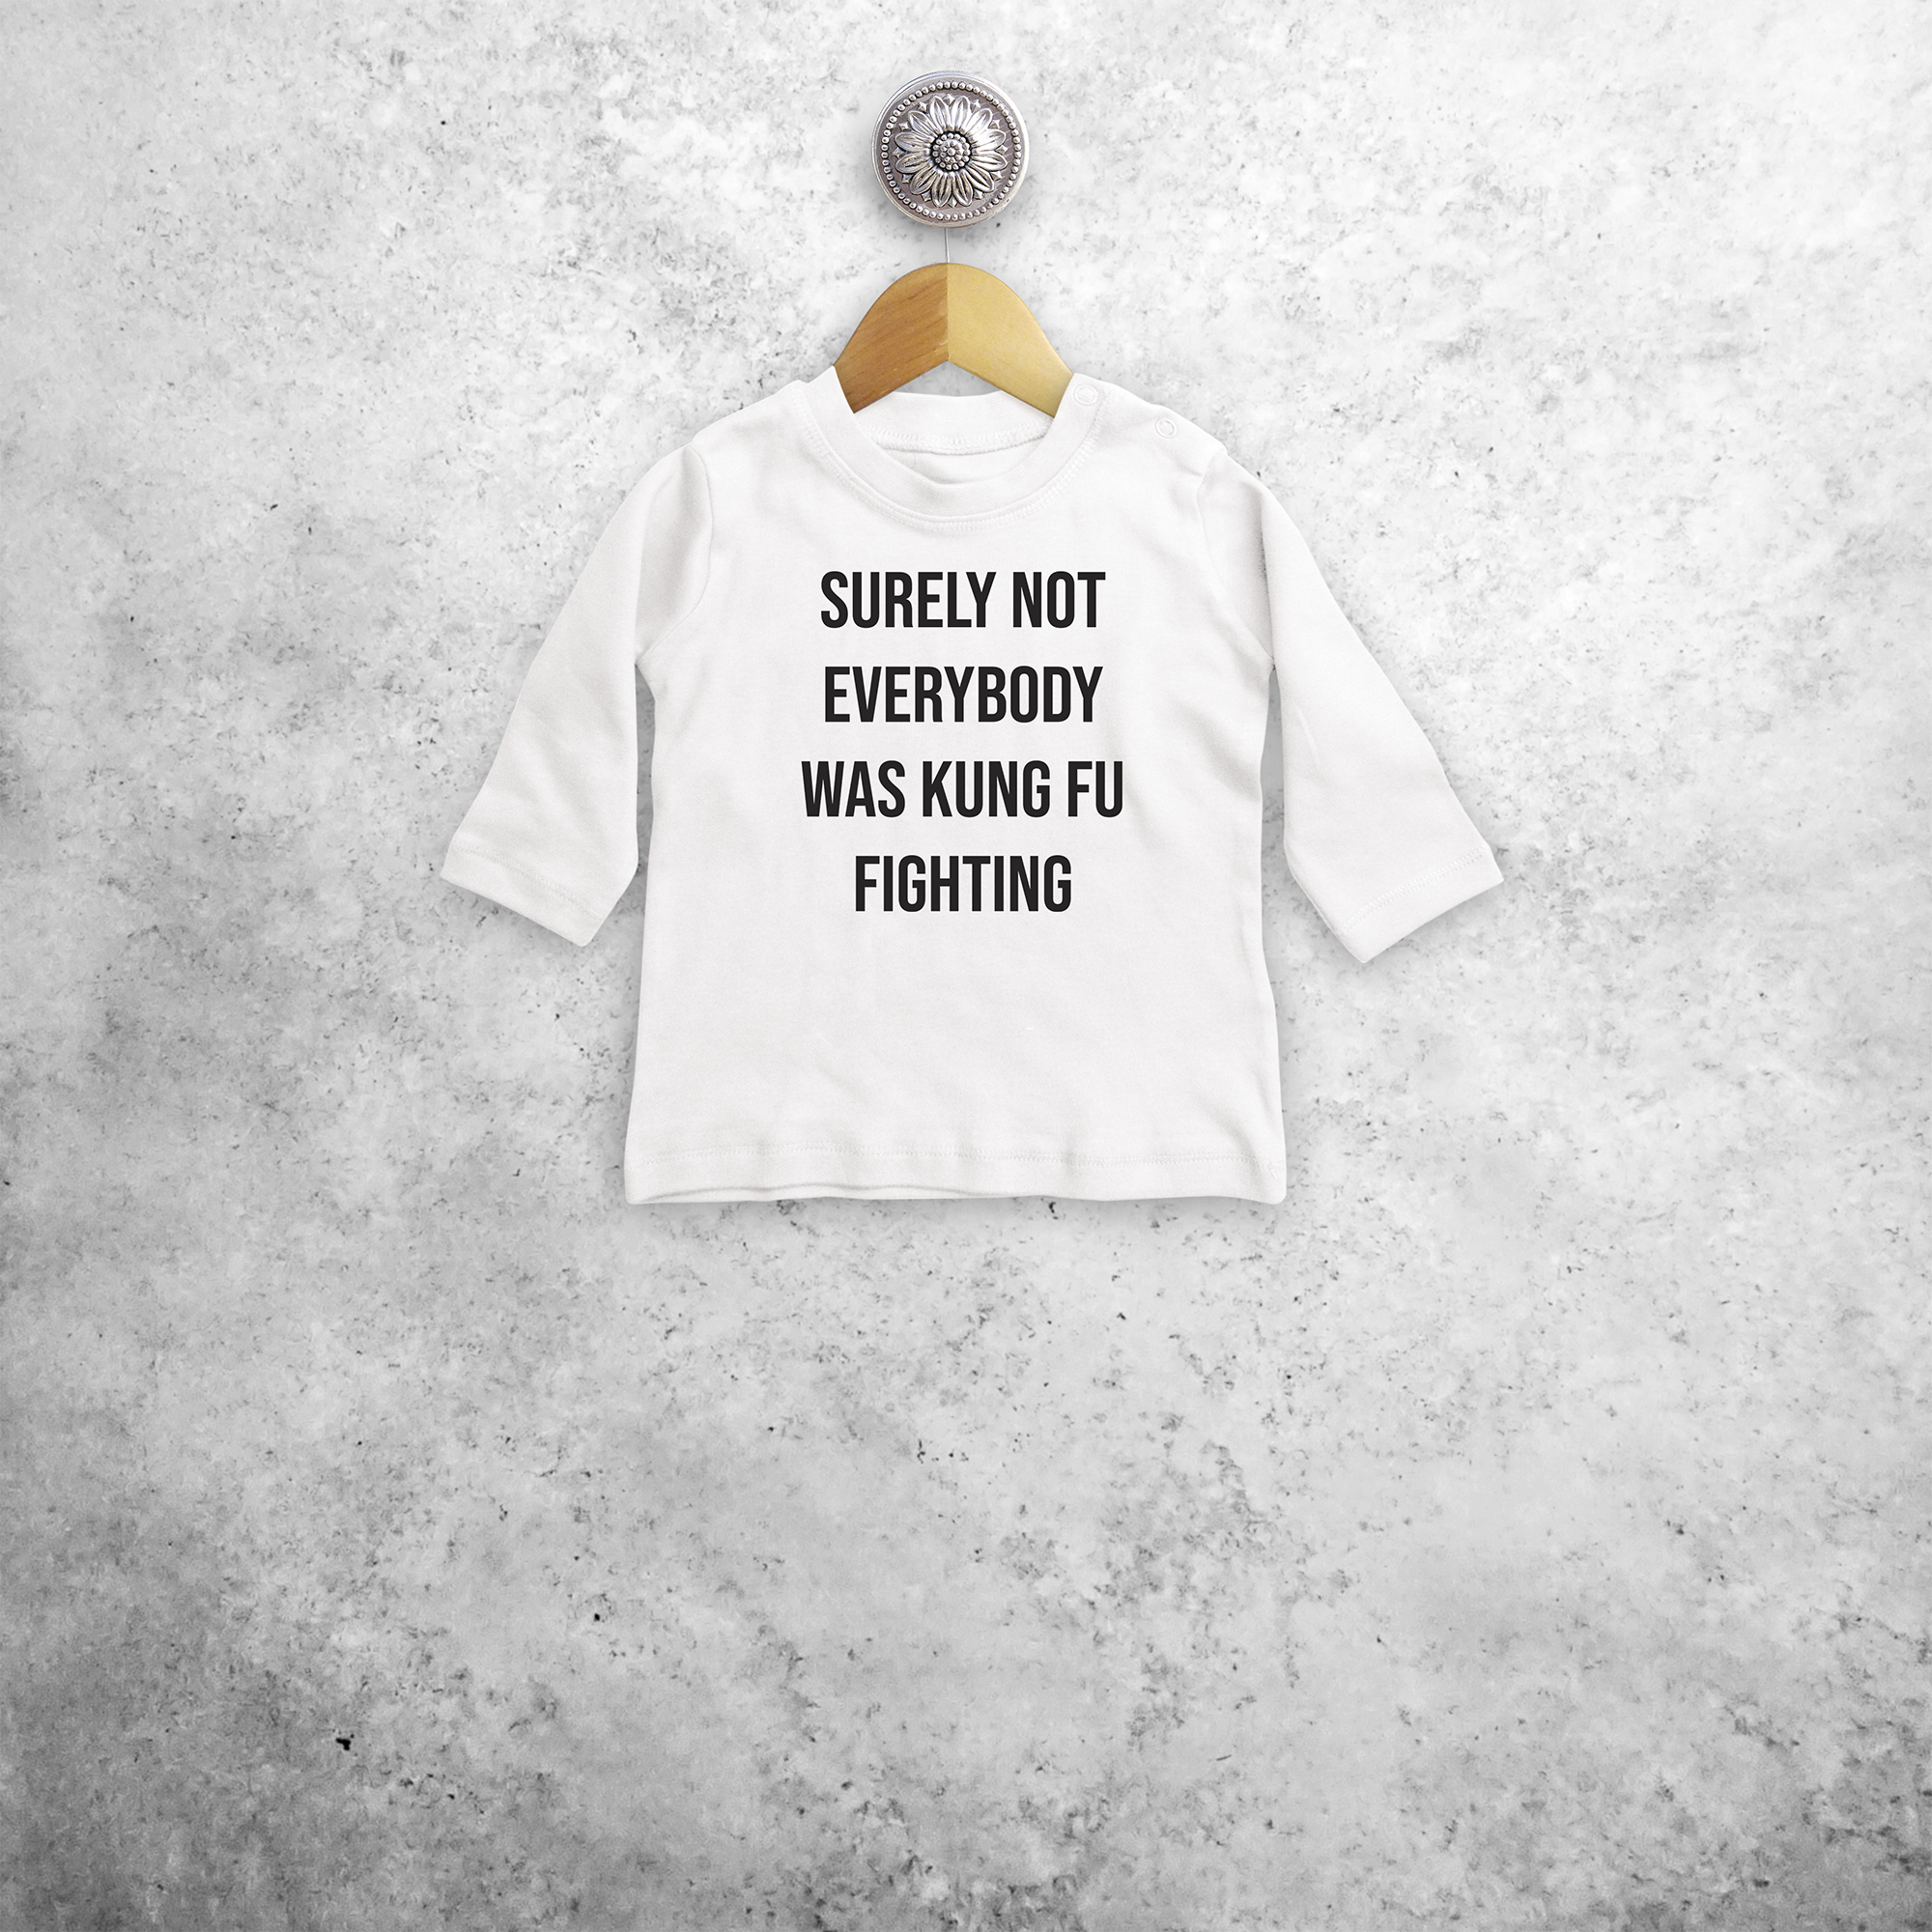 'Surely not everybody was kung fu fighting' baby longsleeve shirt